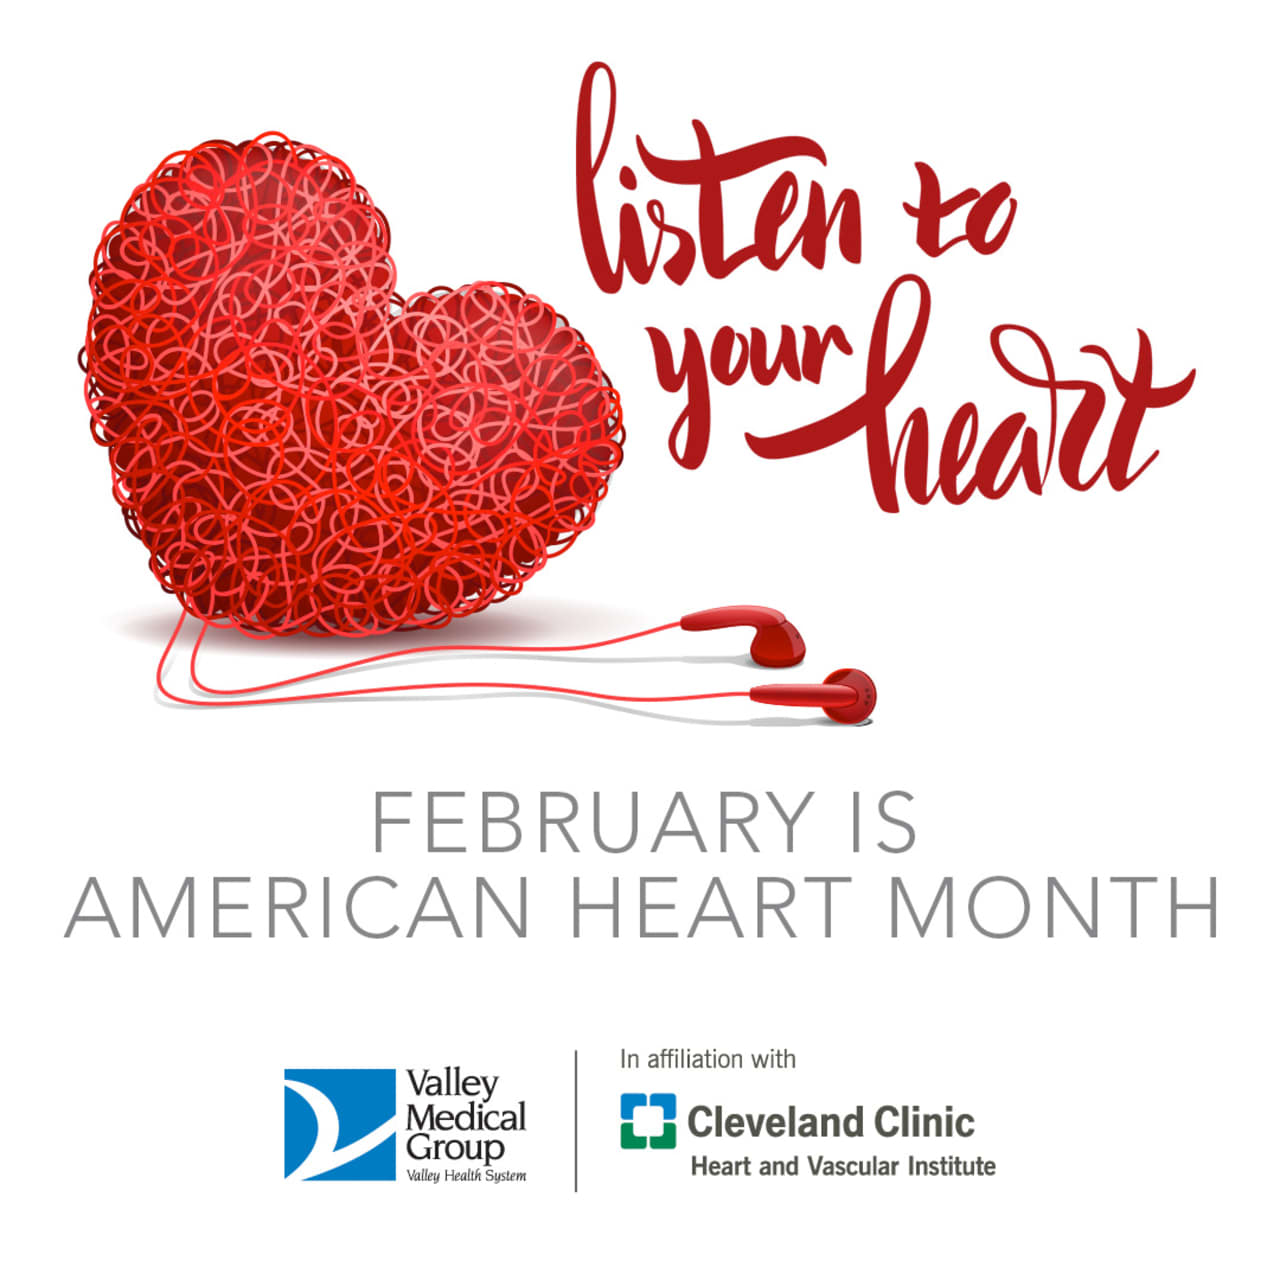 February is American Heart Month. We are dedicating February to helping you learn all about heart health by providing useful tips, facts and so much more from Valley Hospital and their partner, Cleveland Clinic.